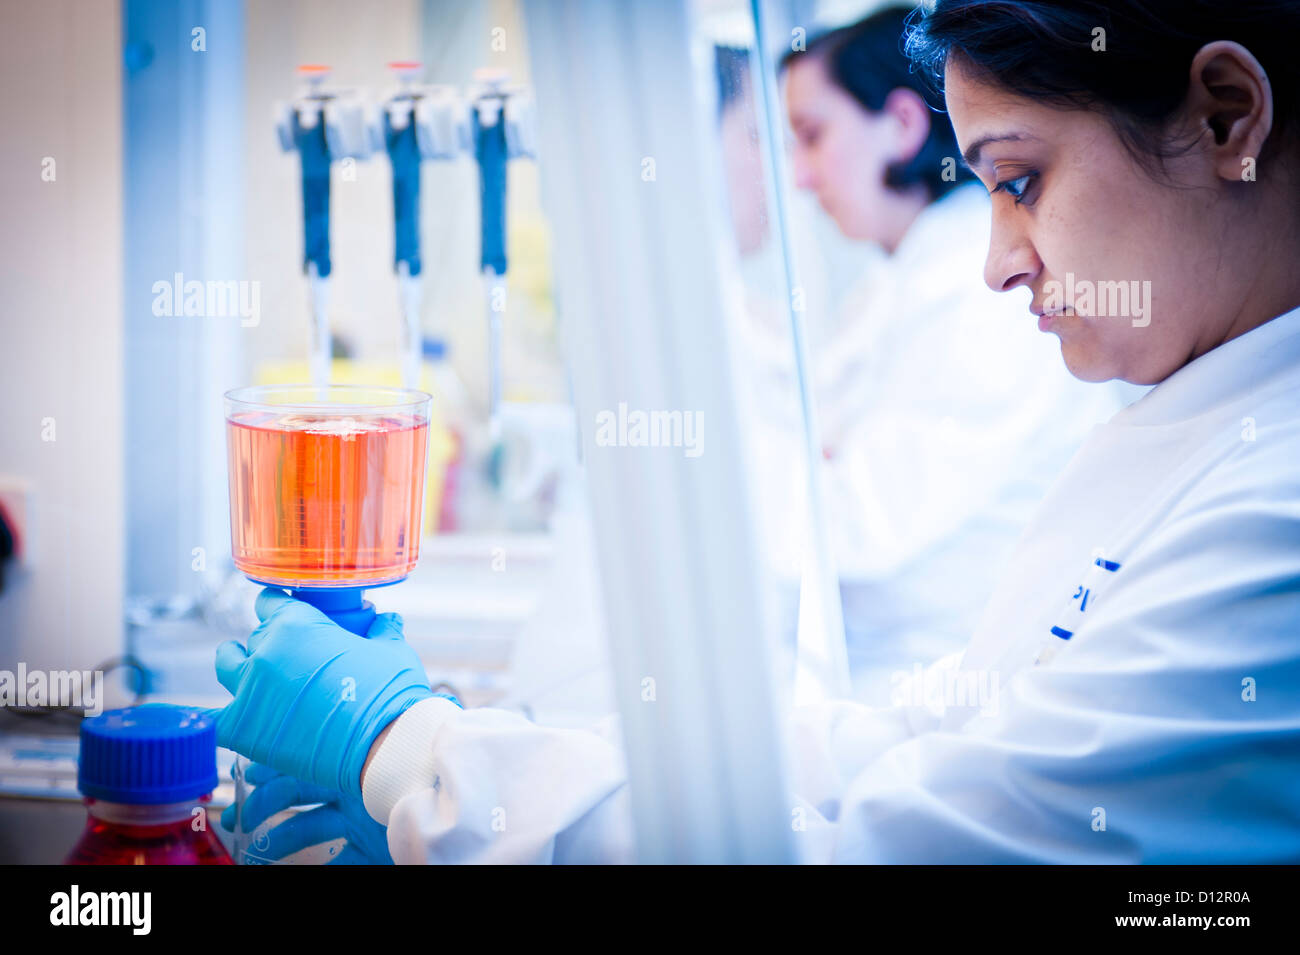 Female Asian scientist working with orange colored liquid in sample beakers at fume cupboard Stock Photo